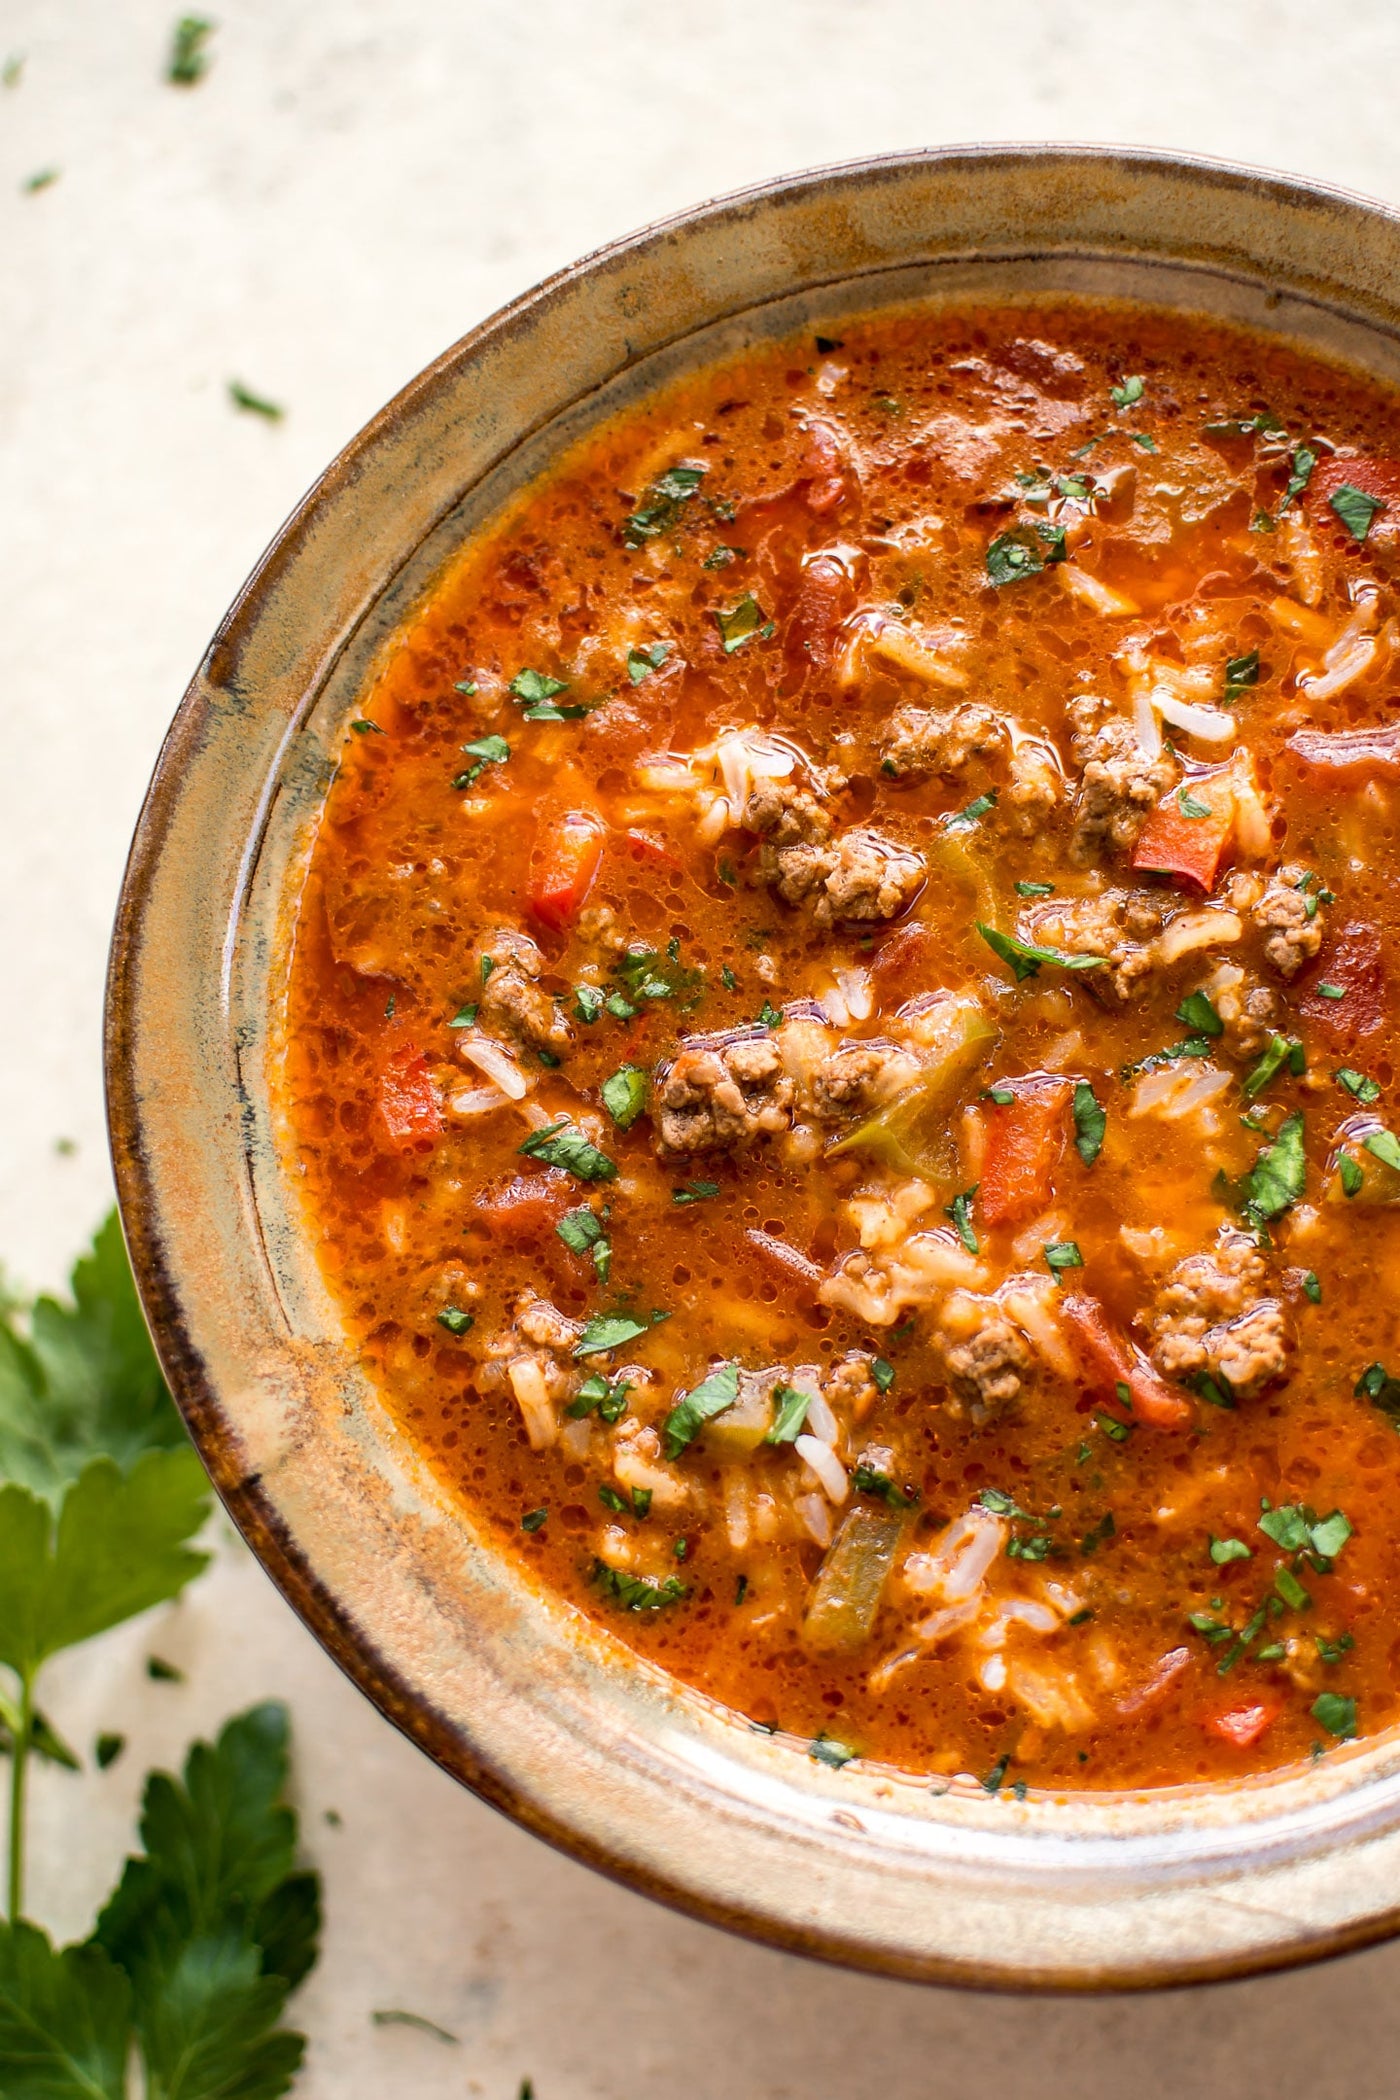 You Need to Try This Tasty Stuffed Pepper Soup ASAP!